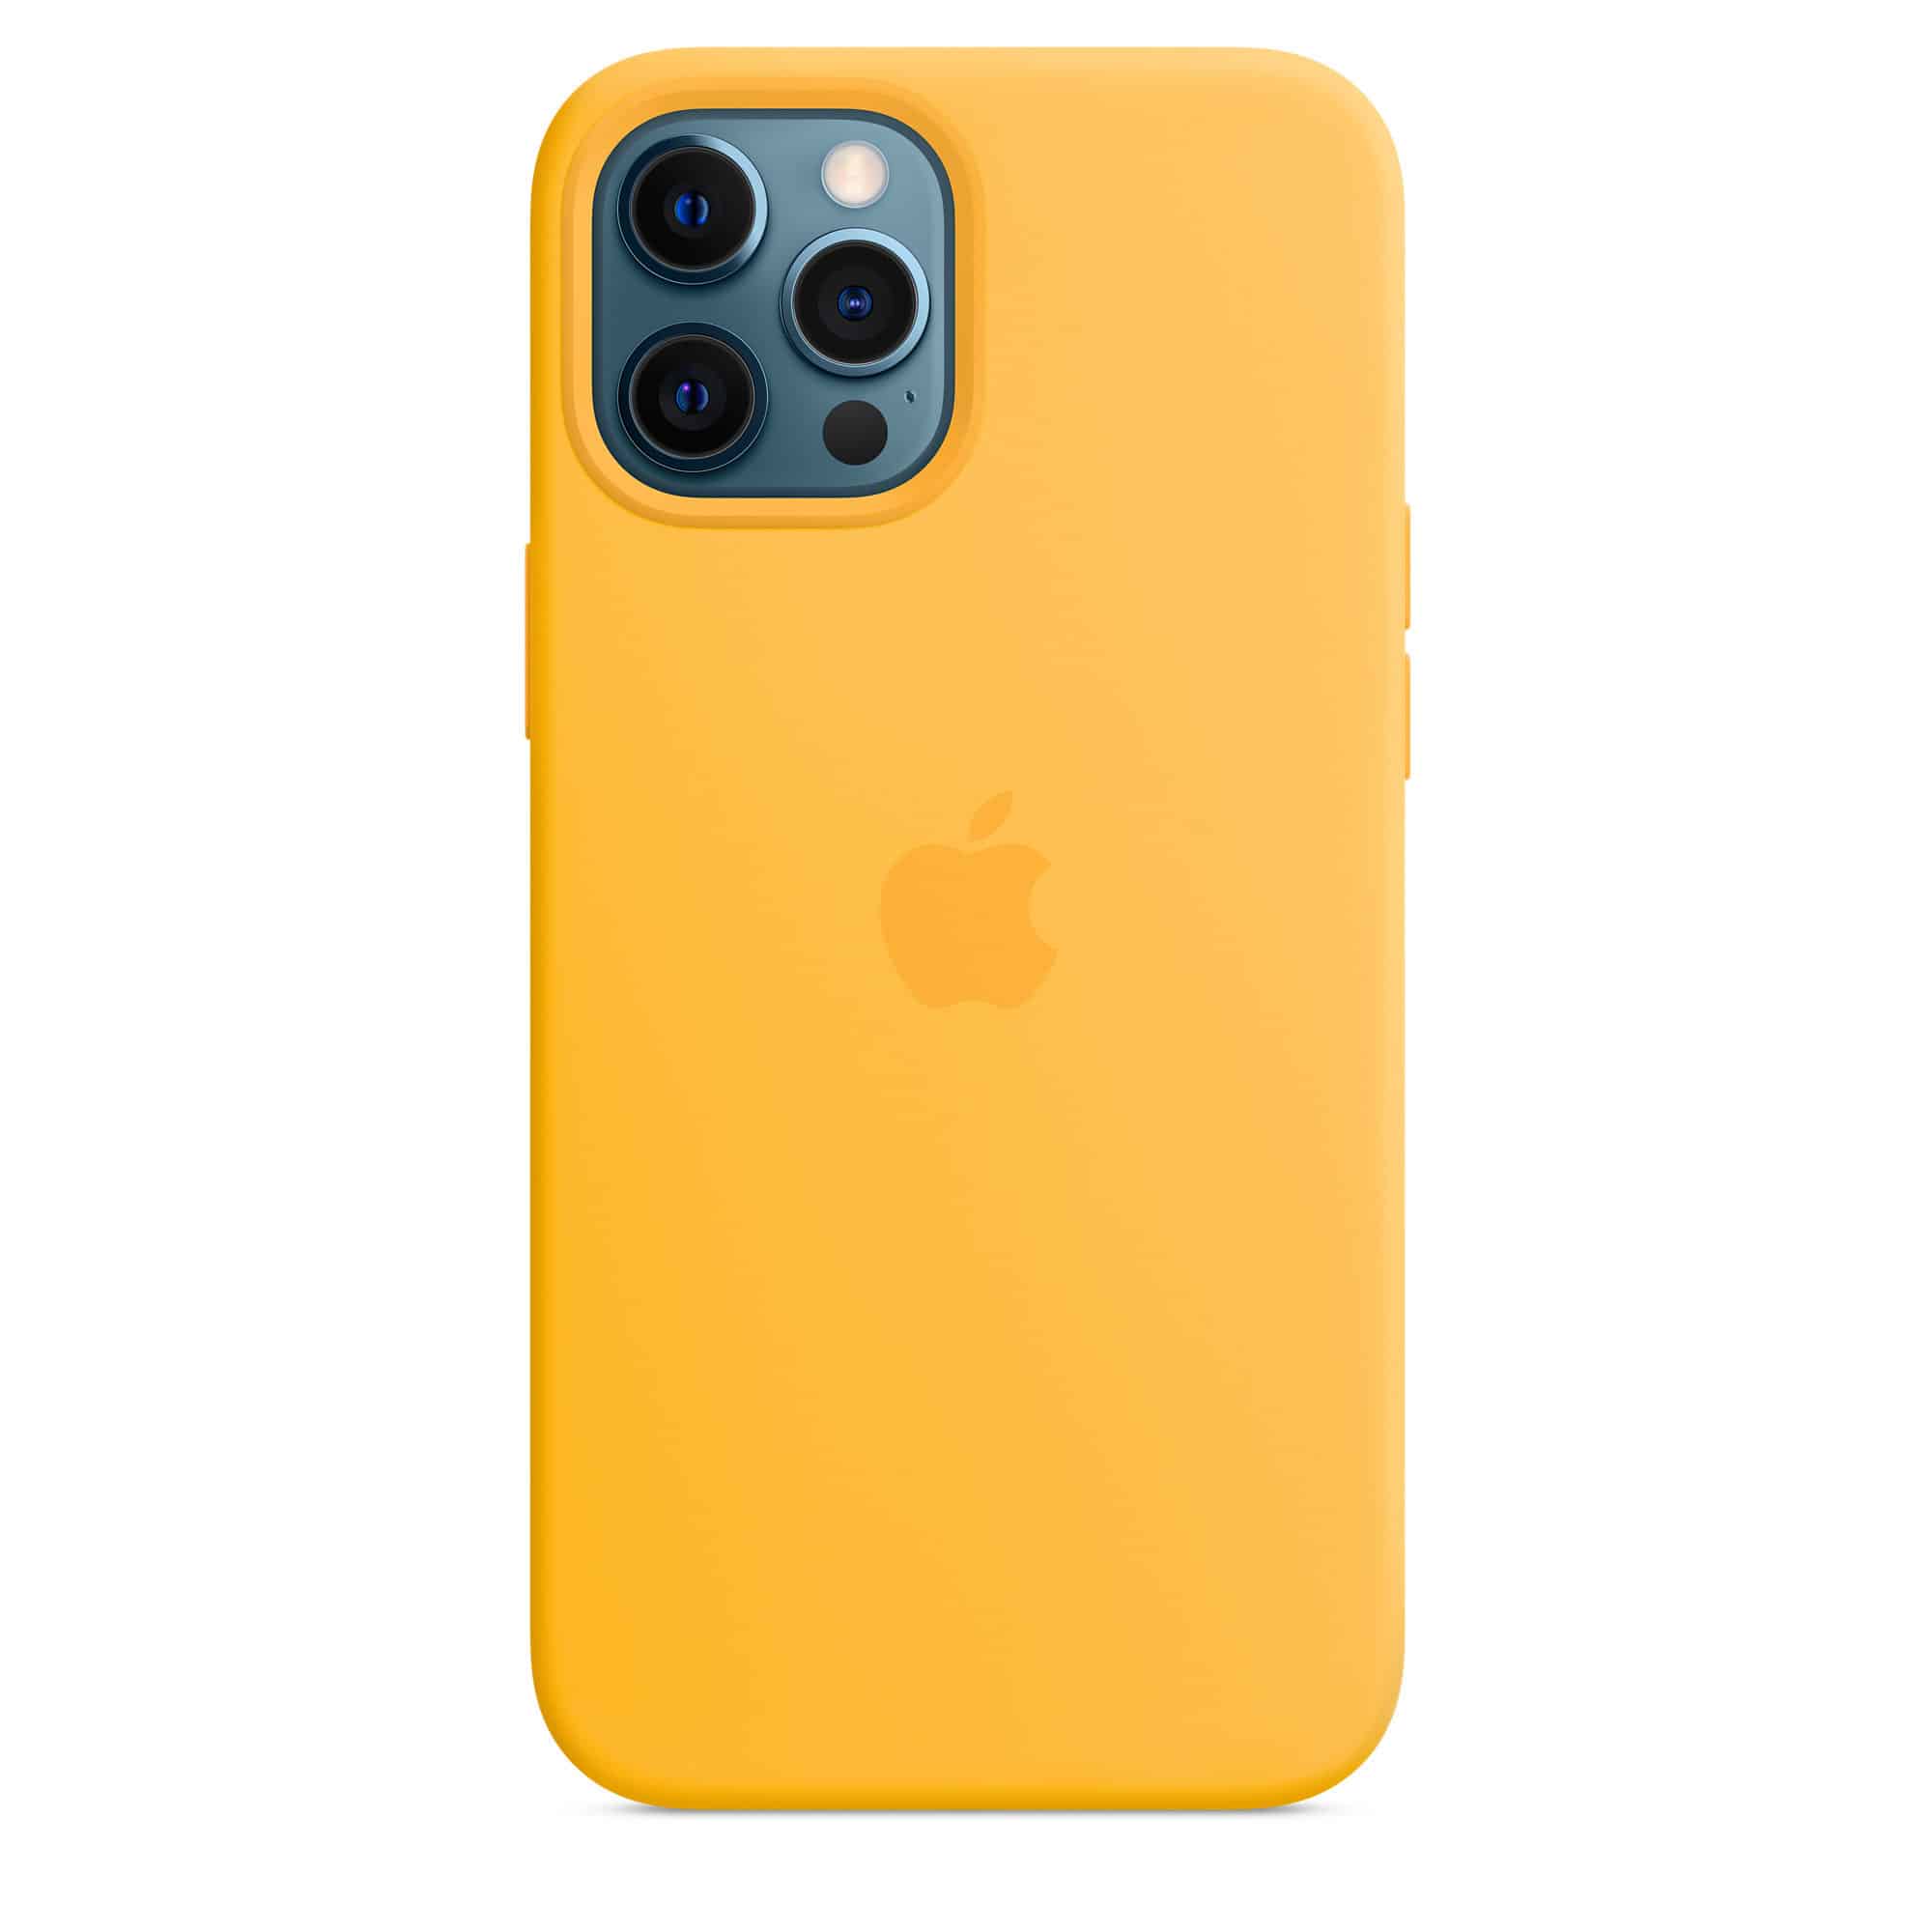 https://www.wearesync.co.uk/wp-content/uploads/2020/11/iphone-12-pro-max-silicone-case-with-magsafe-sunflower.jpg